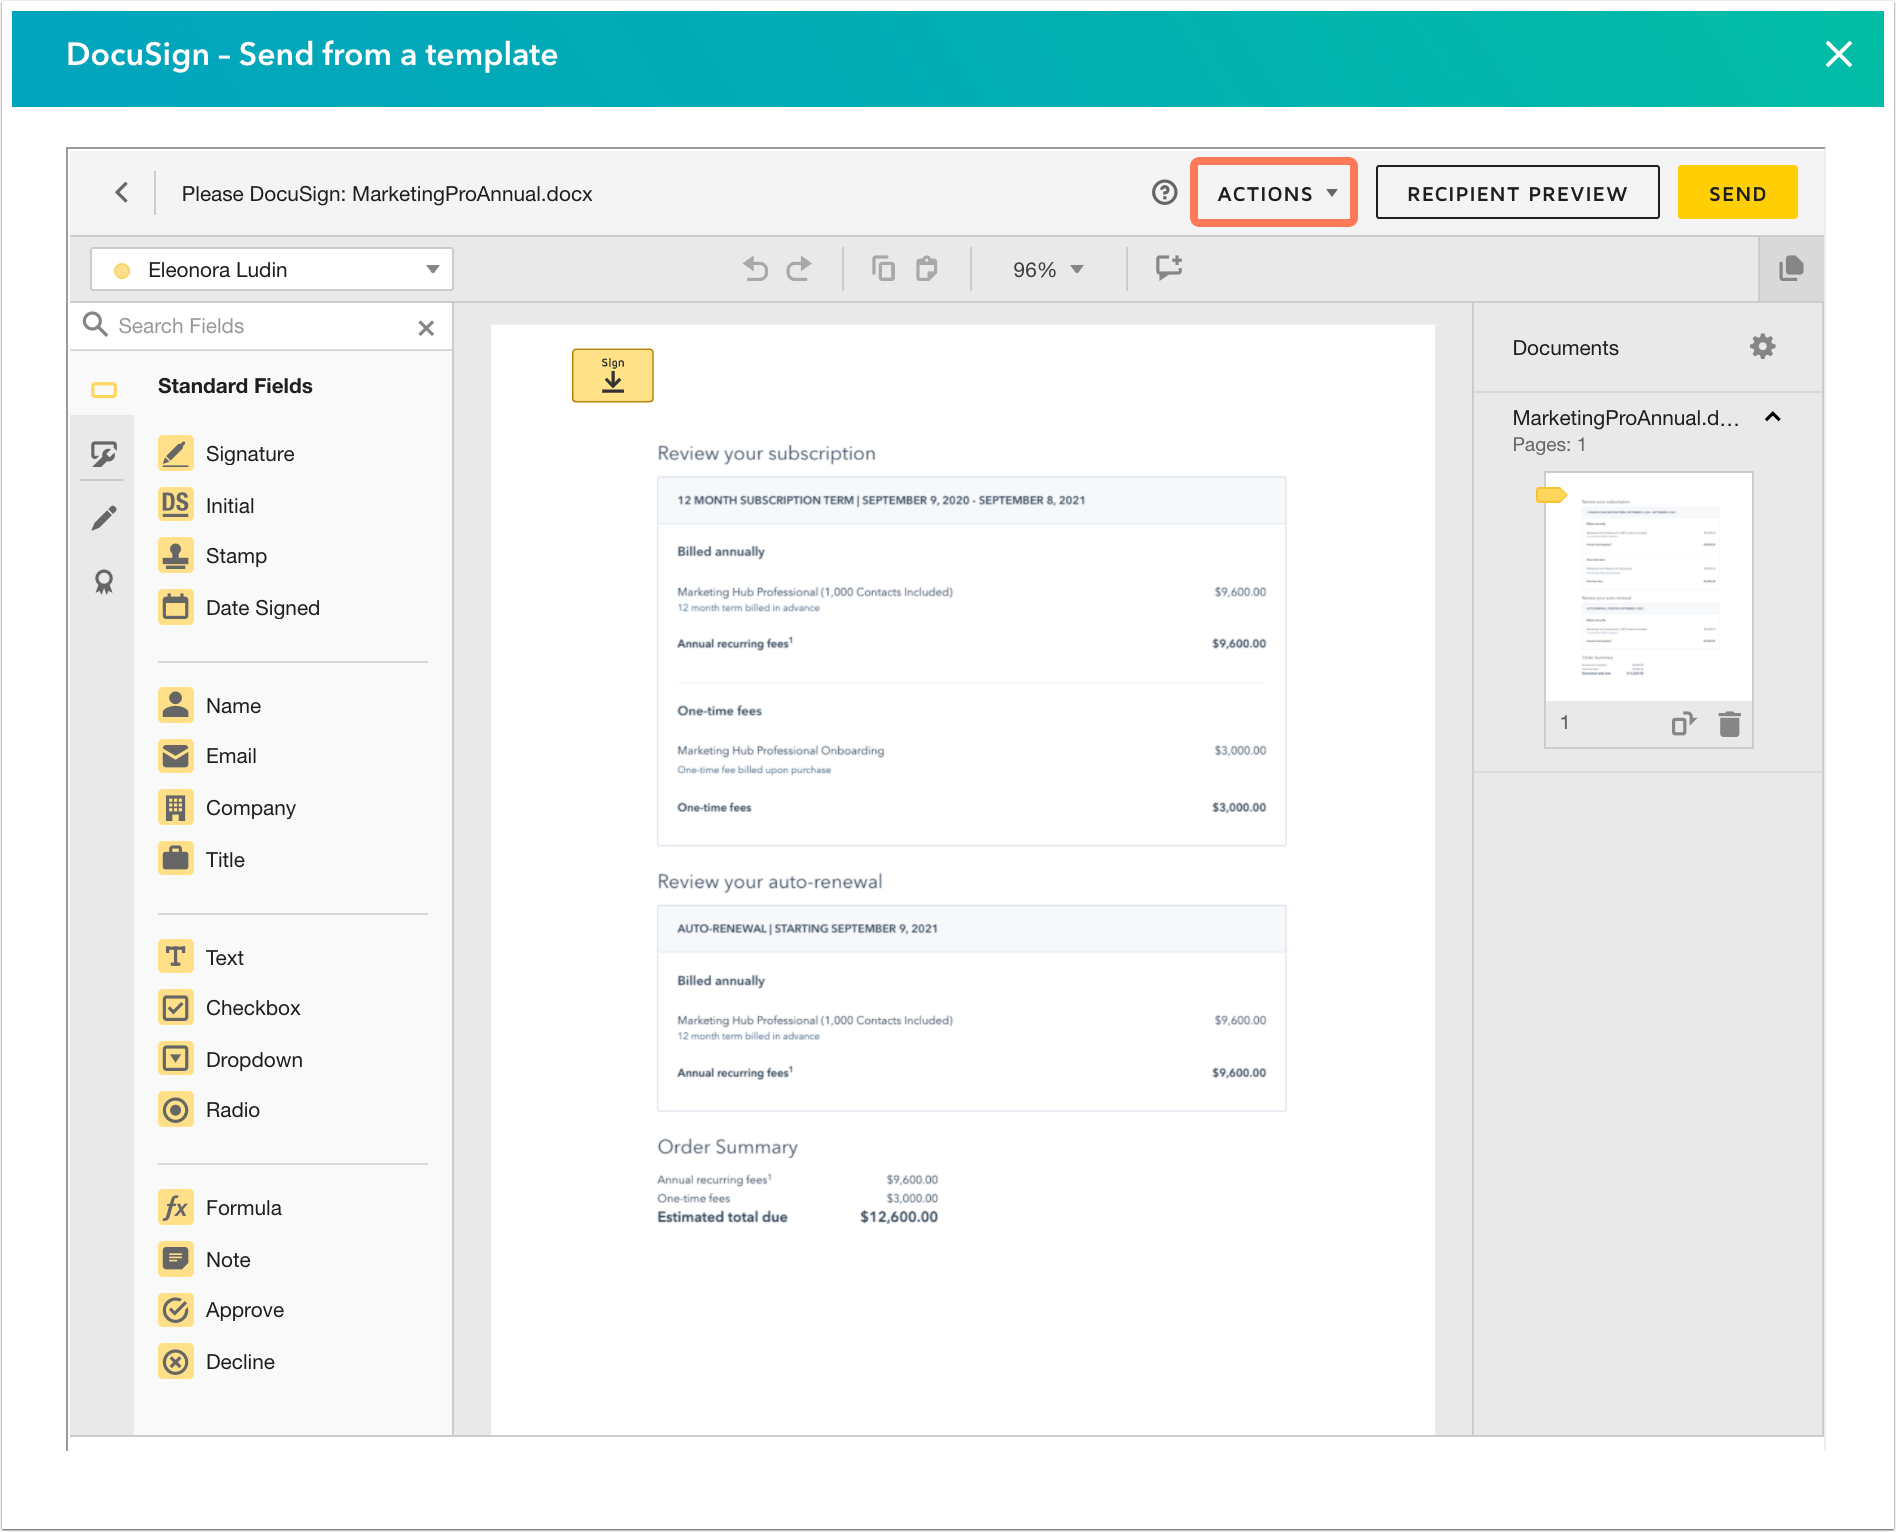 Use HubSpot's integration with DocuSign